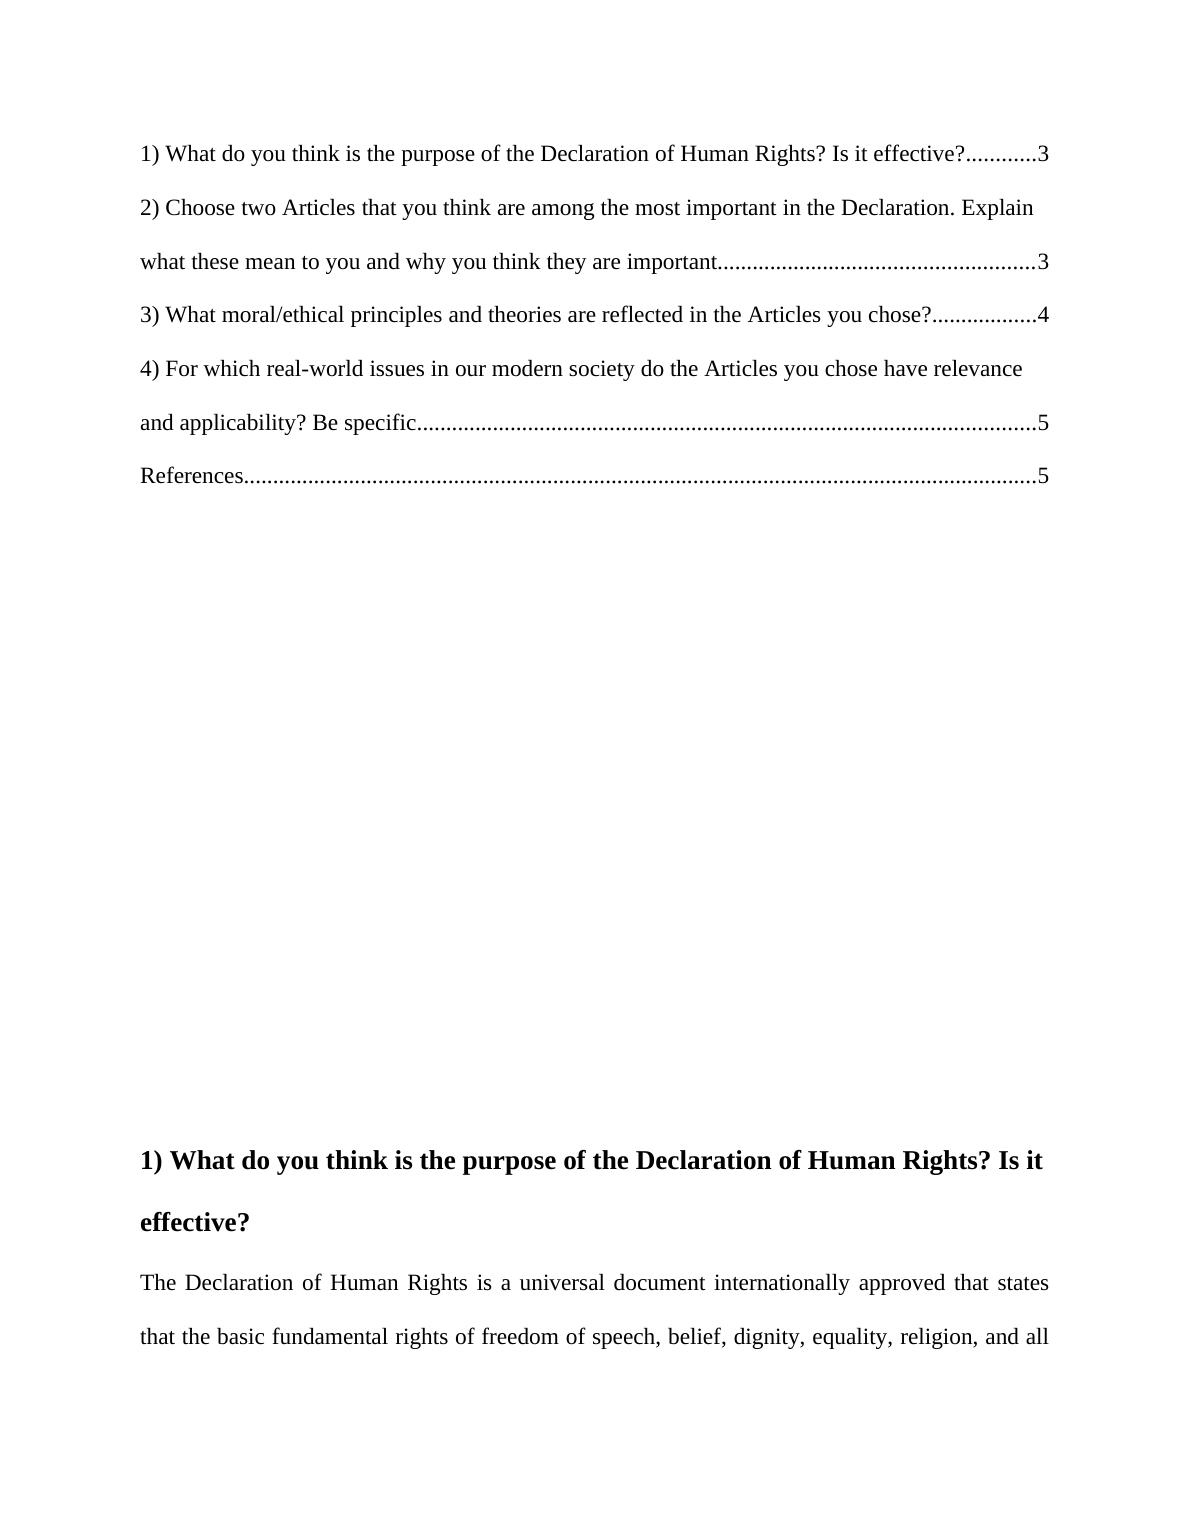 Universal Declaration of Human Rights Assignment_2